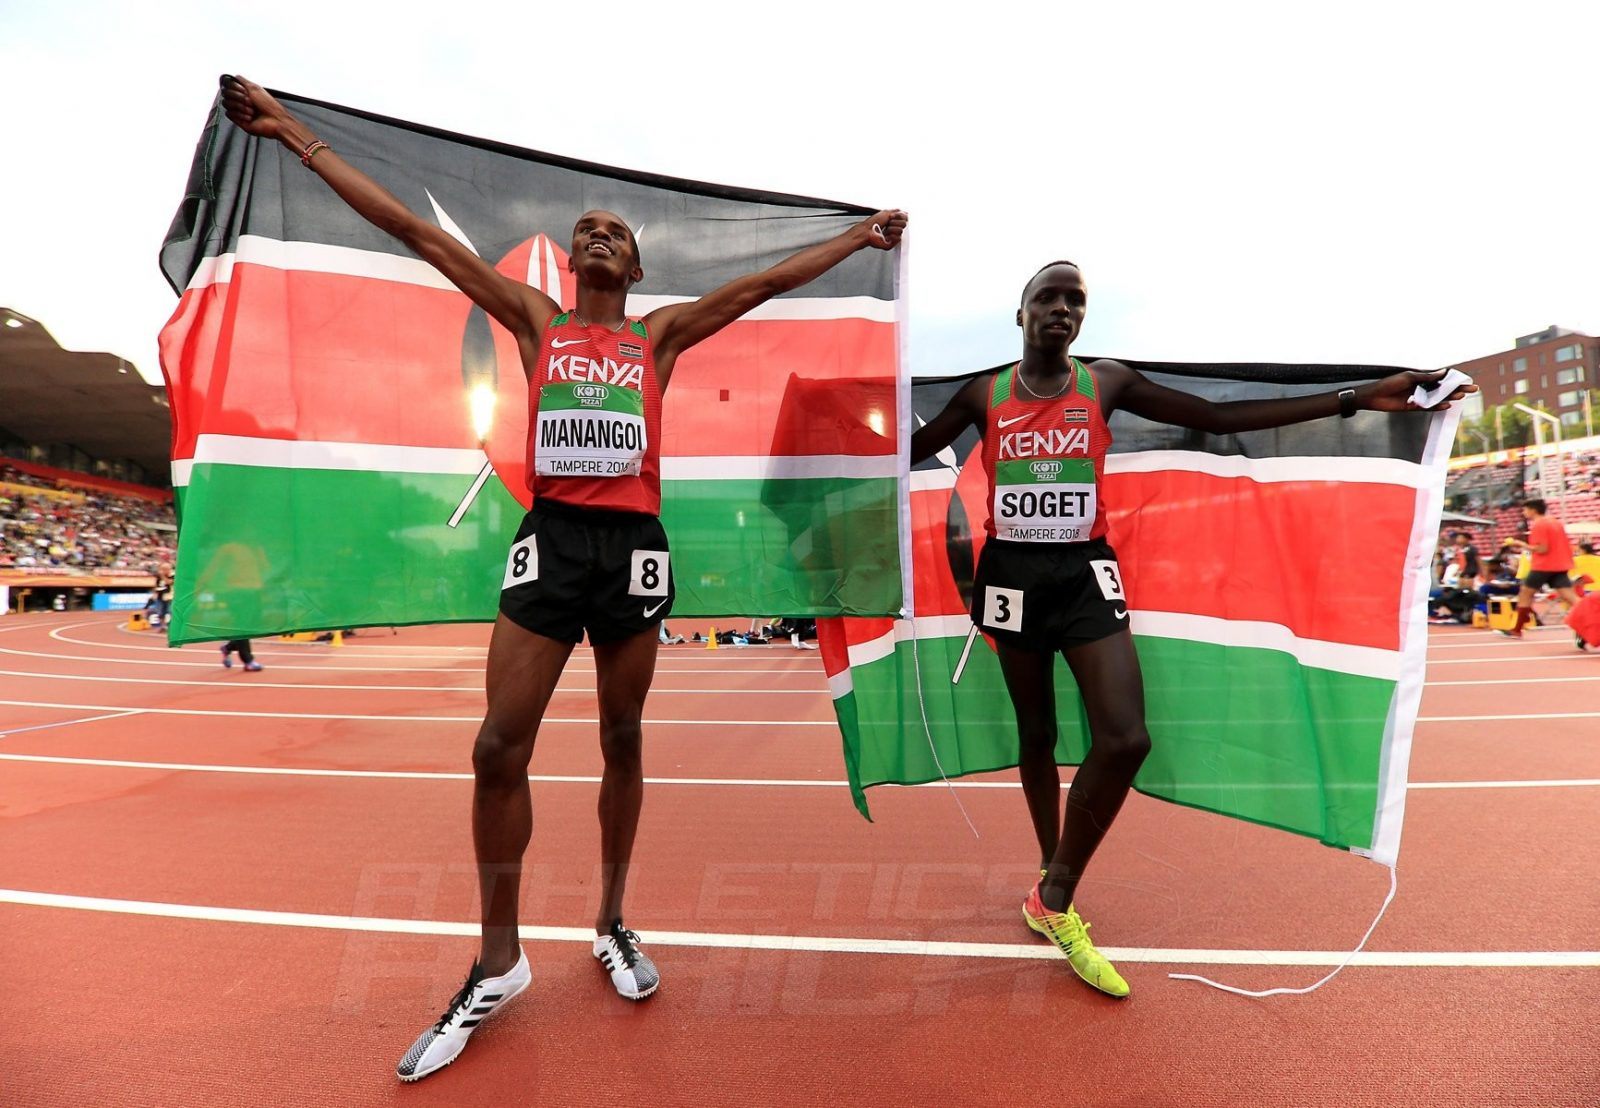 Kenya's George Manangoi celebrates winning the Men's 1500m with compatriot Justus Soget at the IAAF World U20 Championships Tampere 2018 / Photo Credit: Getty Images for IAAF